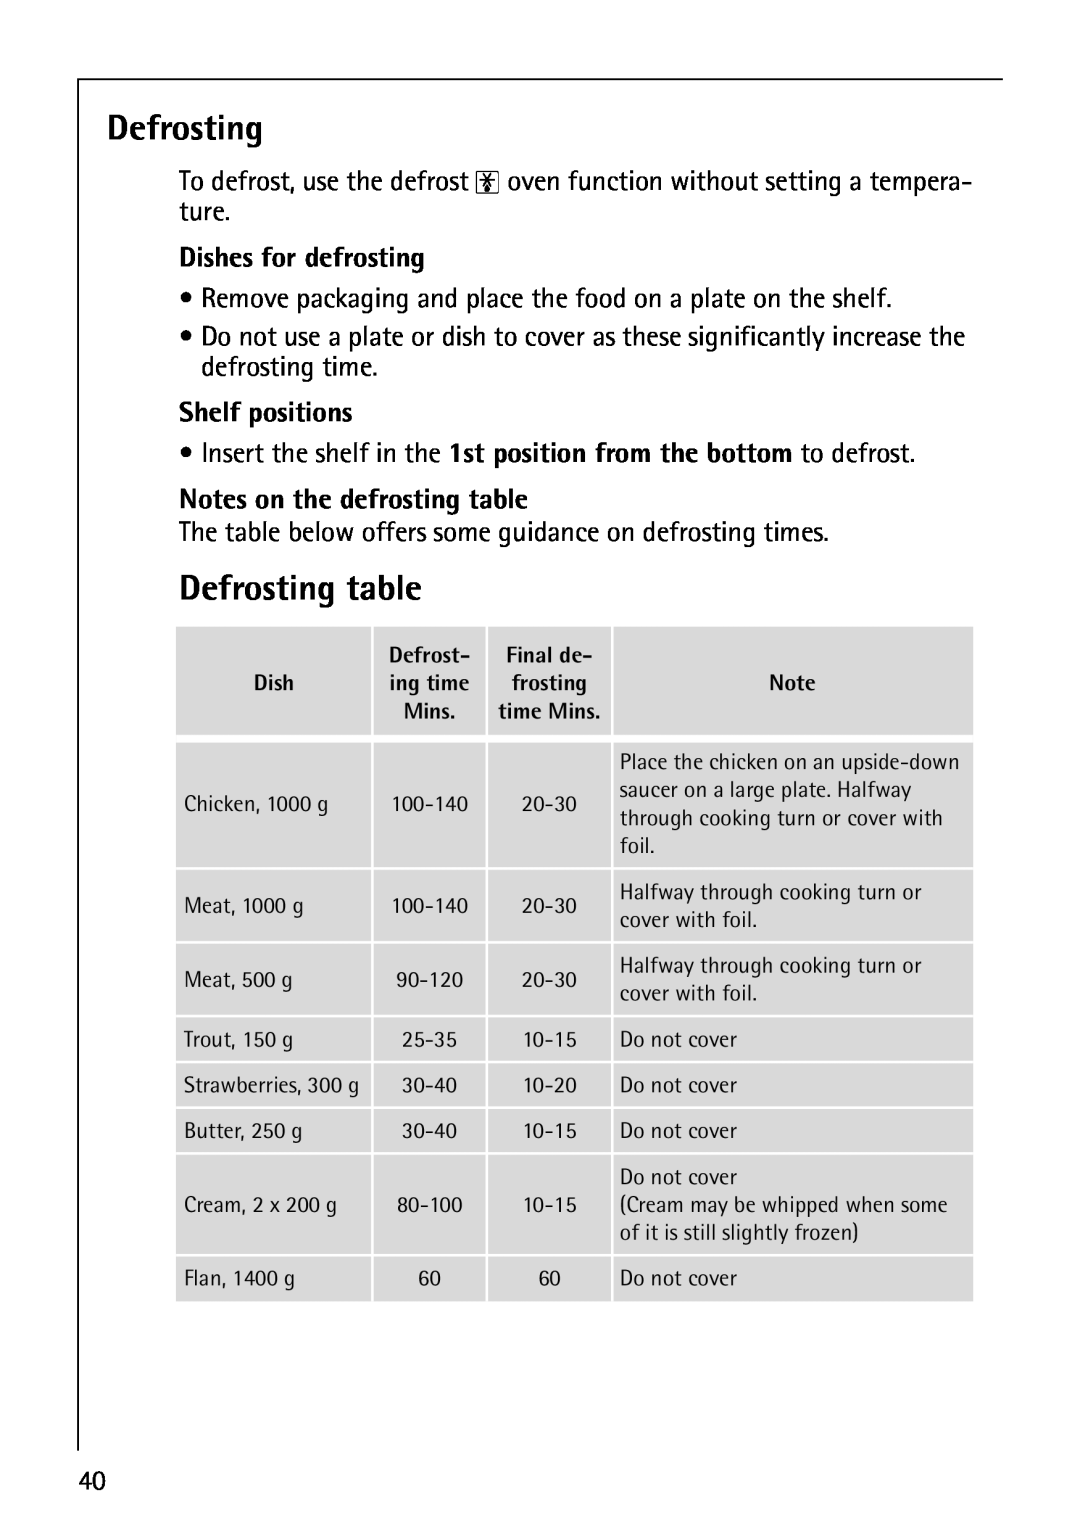 AEG B4130-1 Defrosting table, Dishes for defrosting, Notes on the defrosting table, Shelf positions 